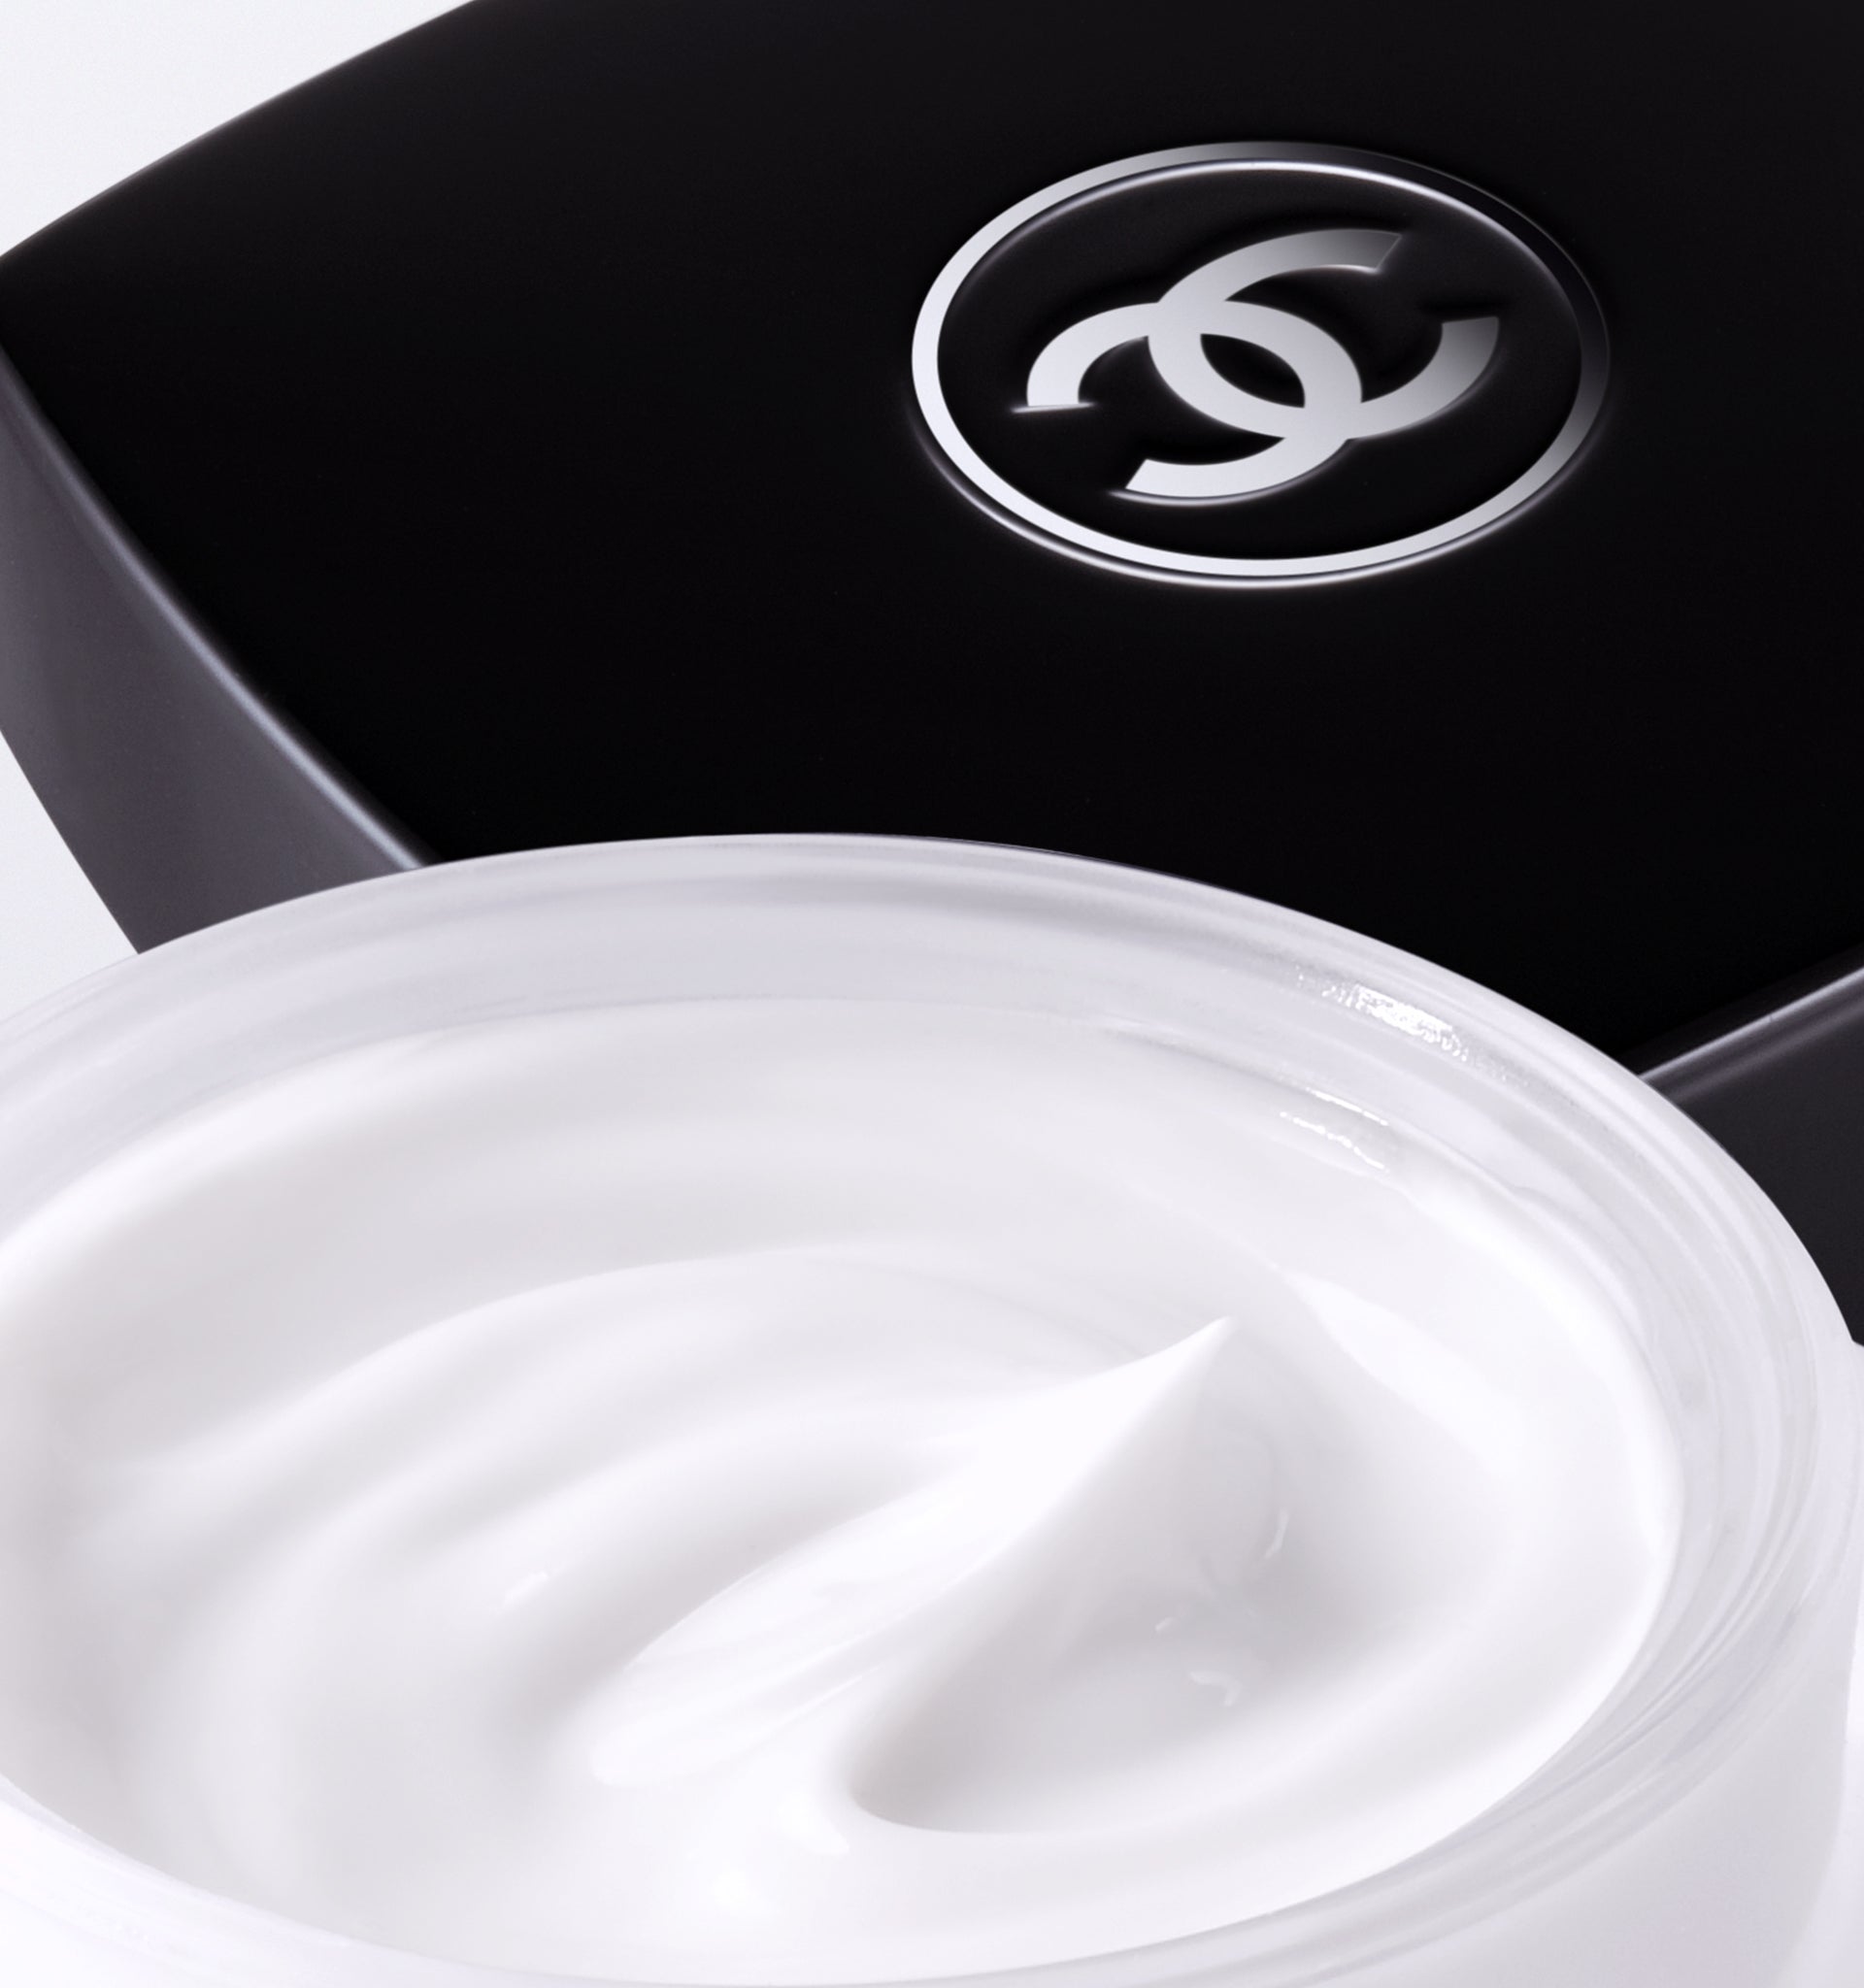 Mặt Nạ CHANEL Hydra Beauty Camellia Repair Mask